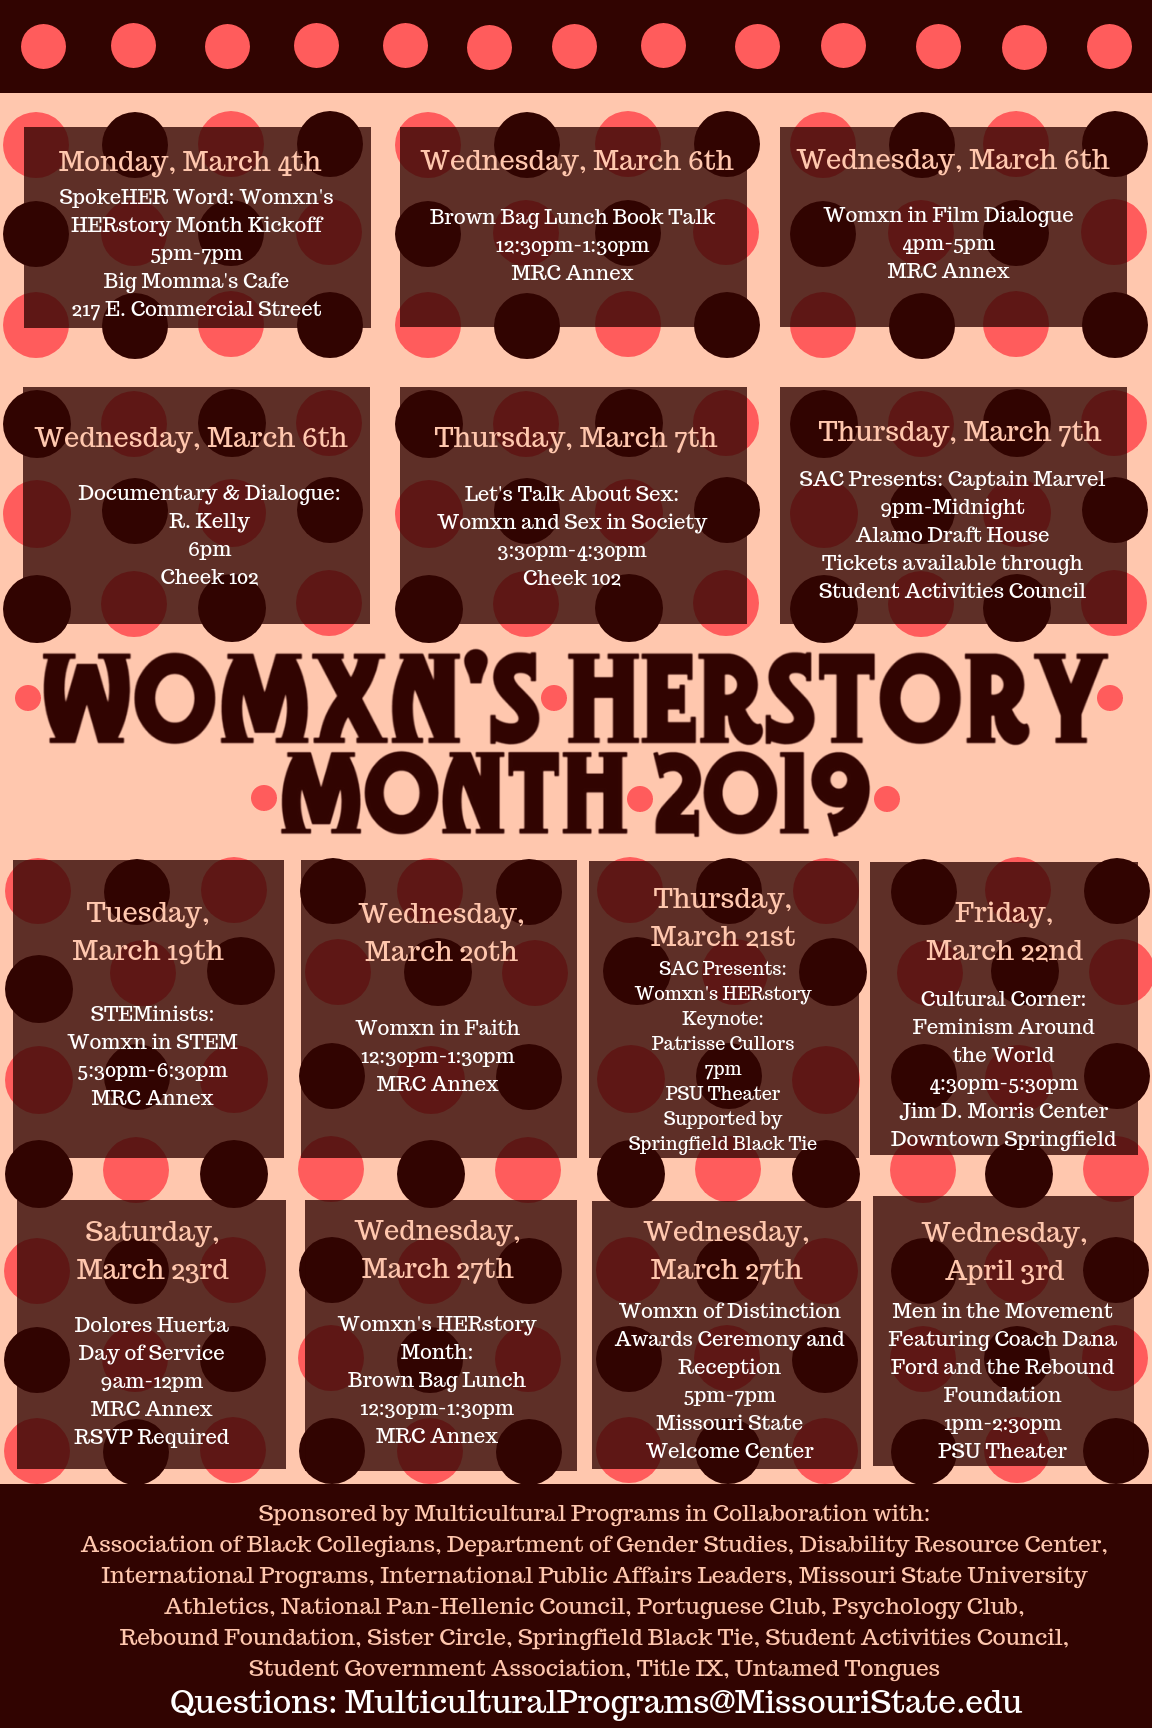 Womxn's HERstory Month 2019